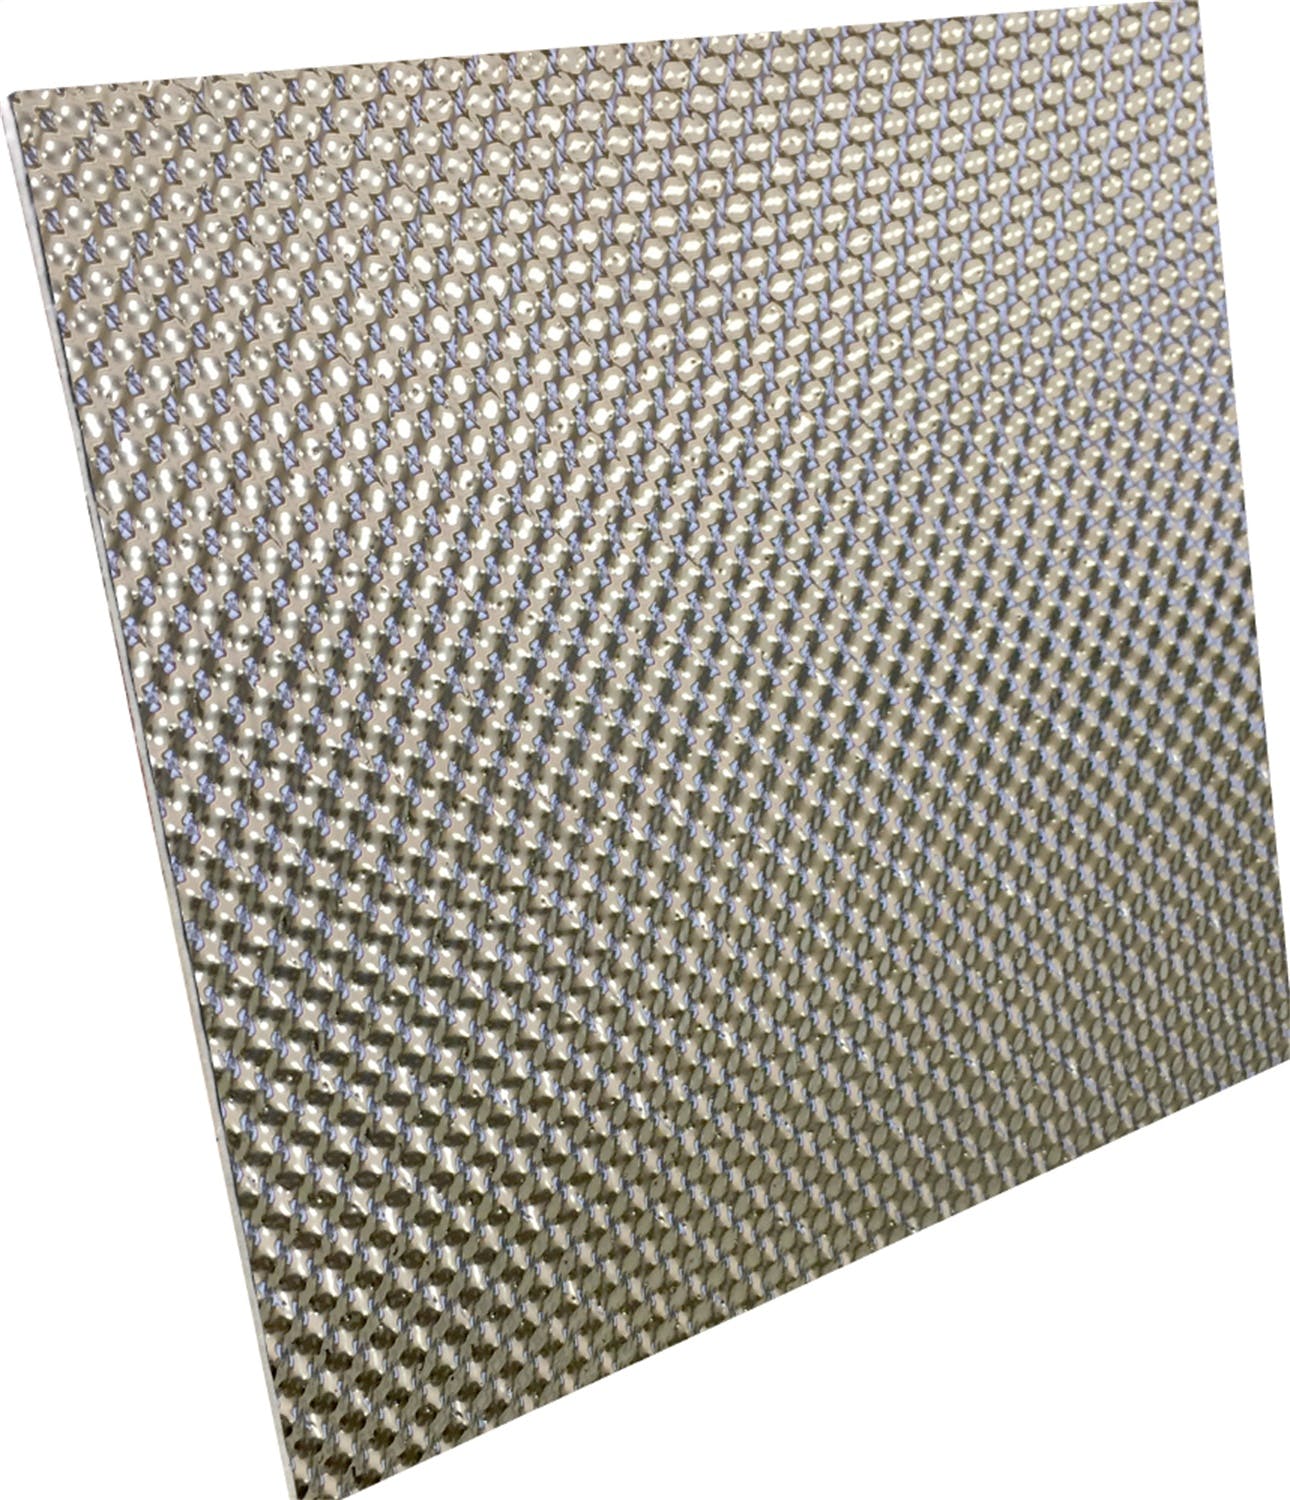 Design Engineering, Inc. 50551 Acoustical Floor and Tunnel Shield, Stainless Steel, 22in x 19in